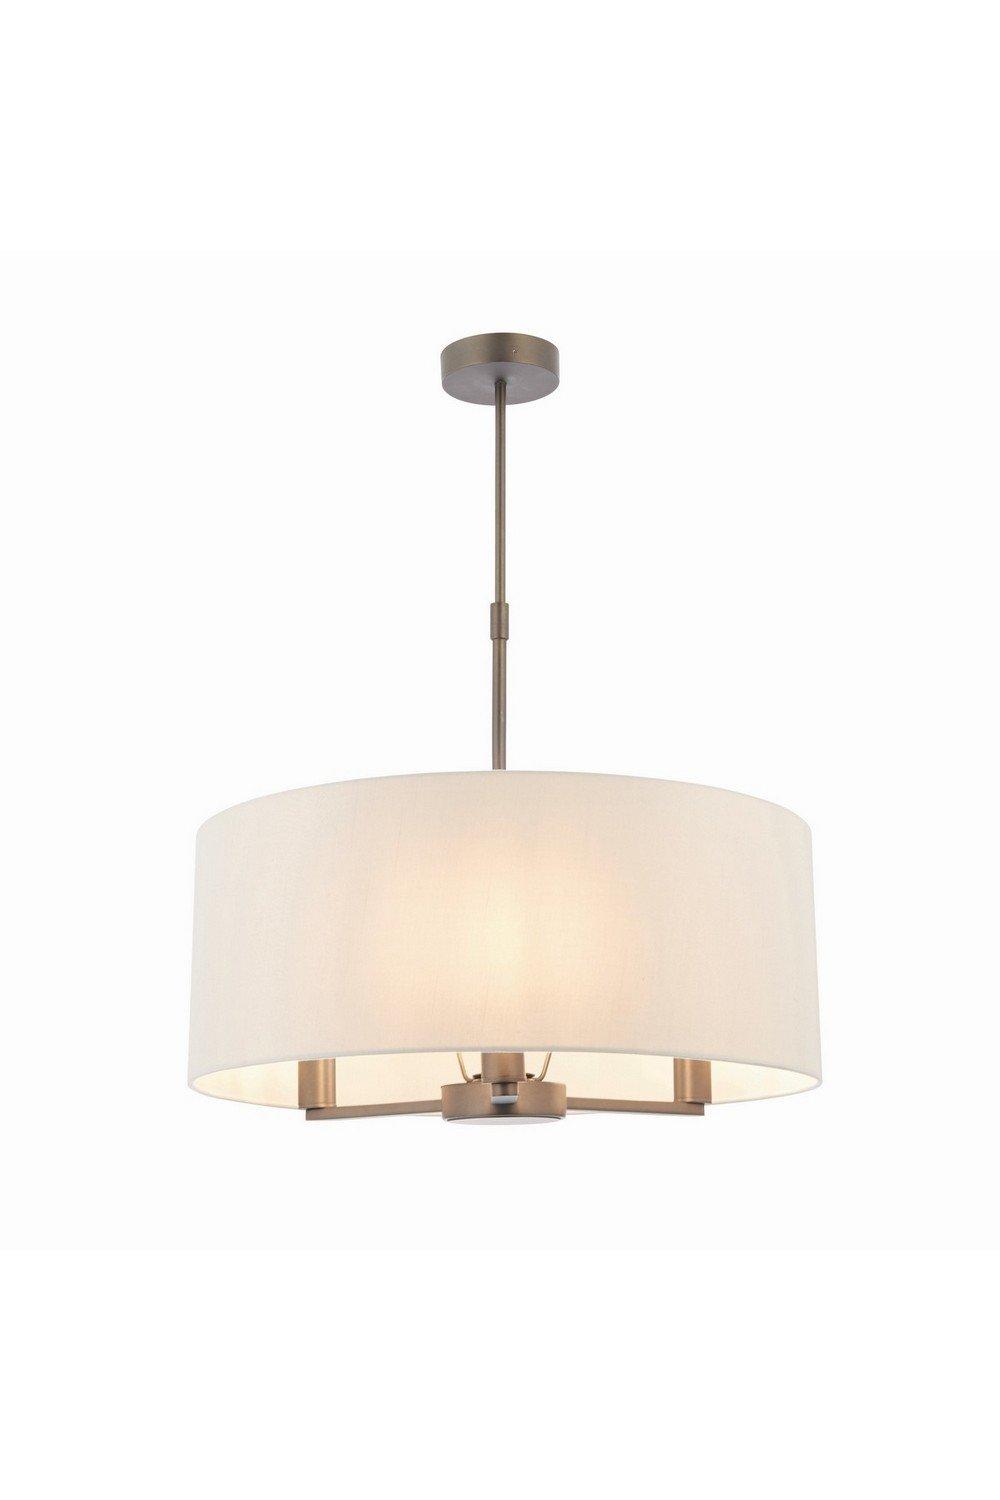 Daley Multi Arm Cylindrical Pendant Light Antique Bronze Plate Marble Fabric